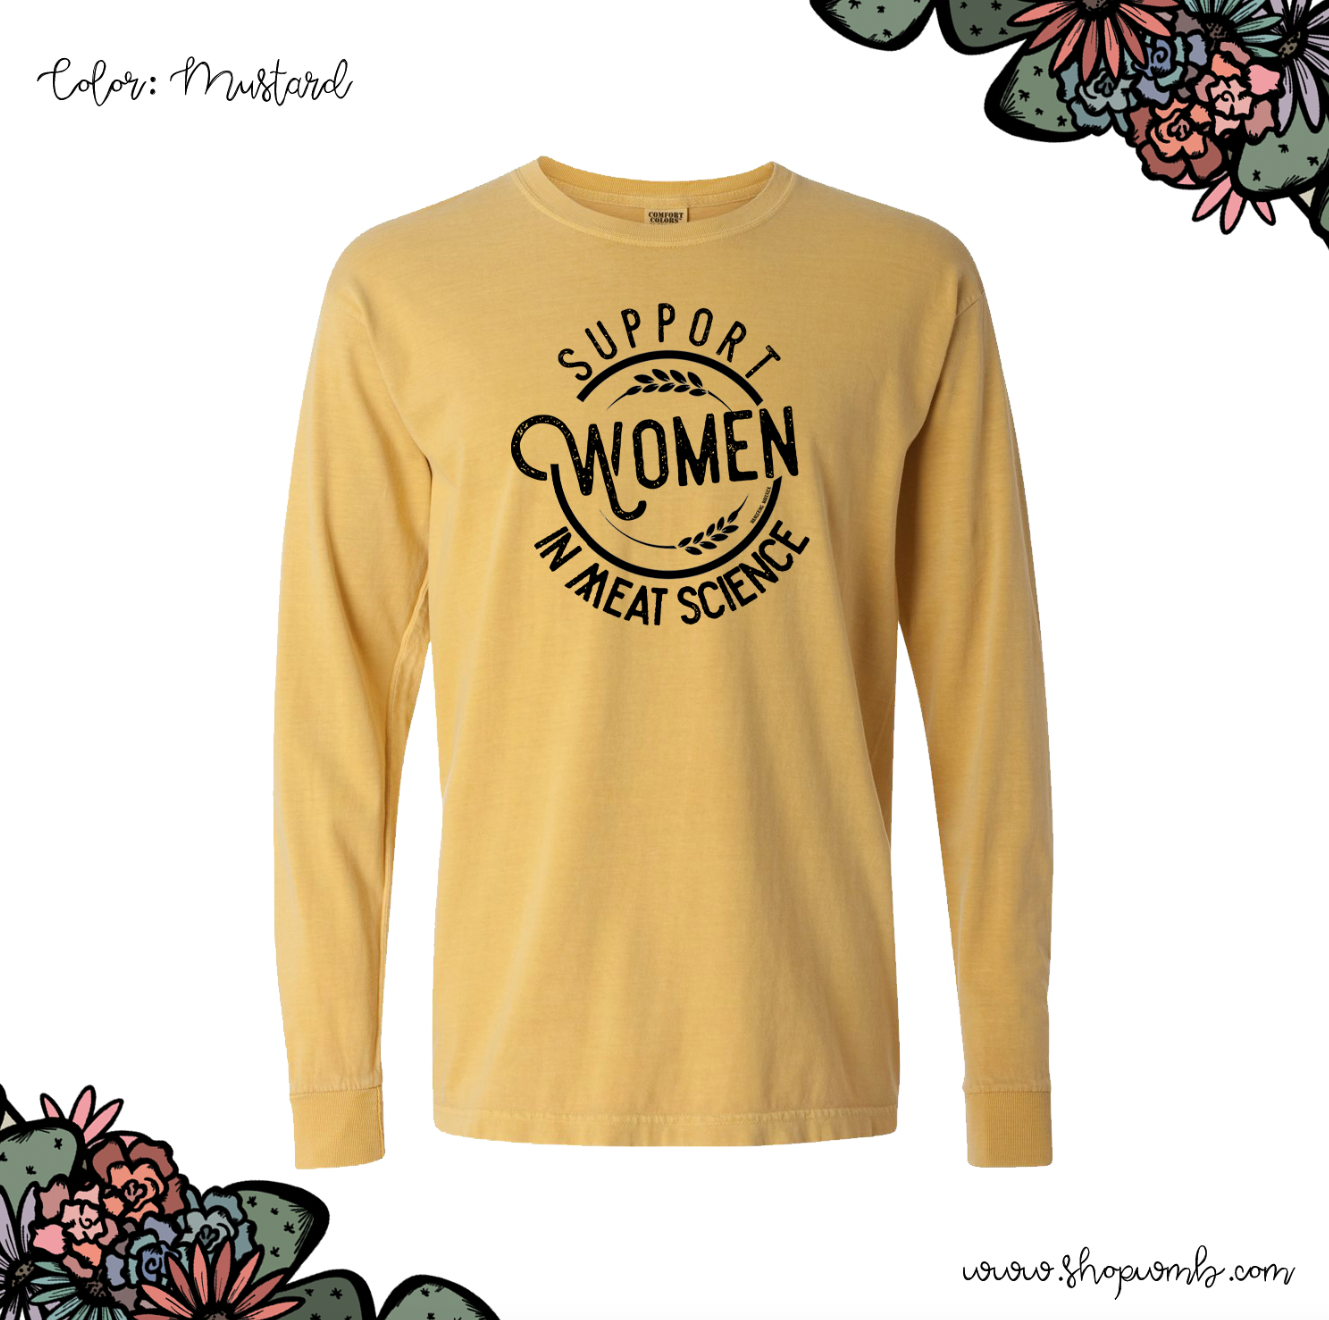 Support Women In Meat Science LONG SLEEVE T-Shirt (S-3XL) - Multiple Colors!